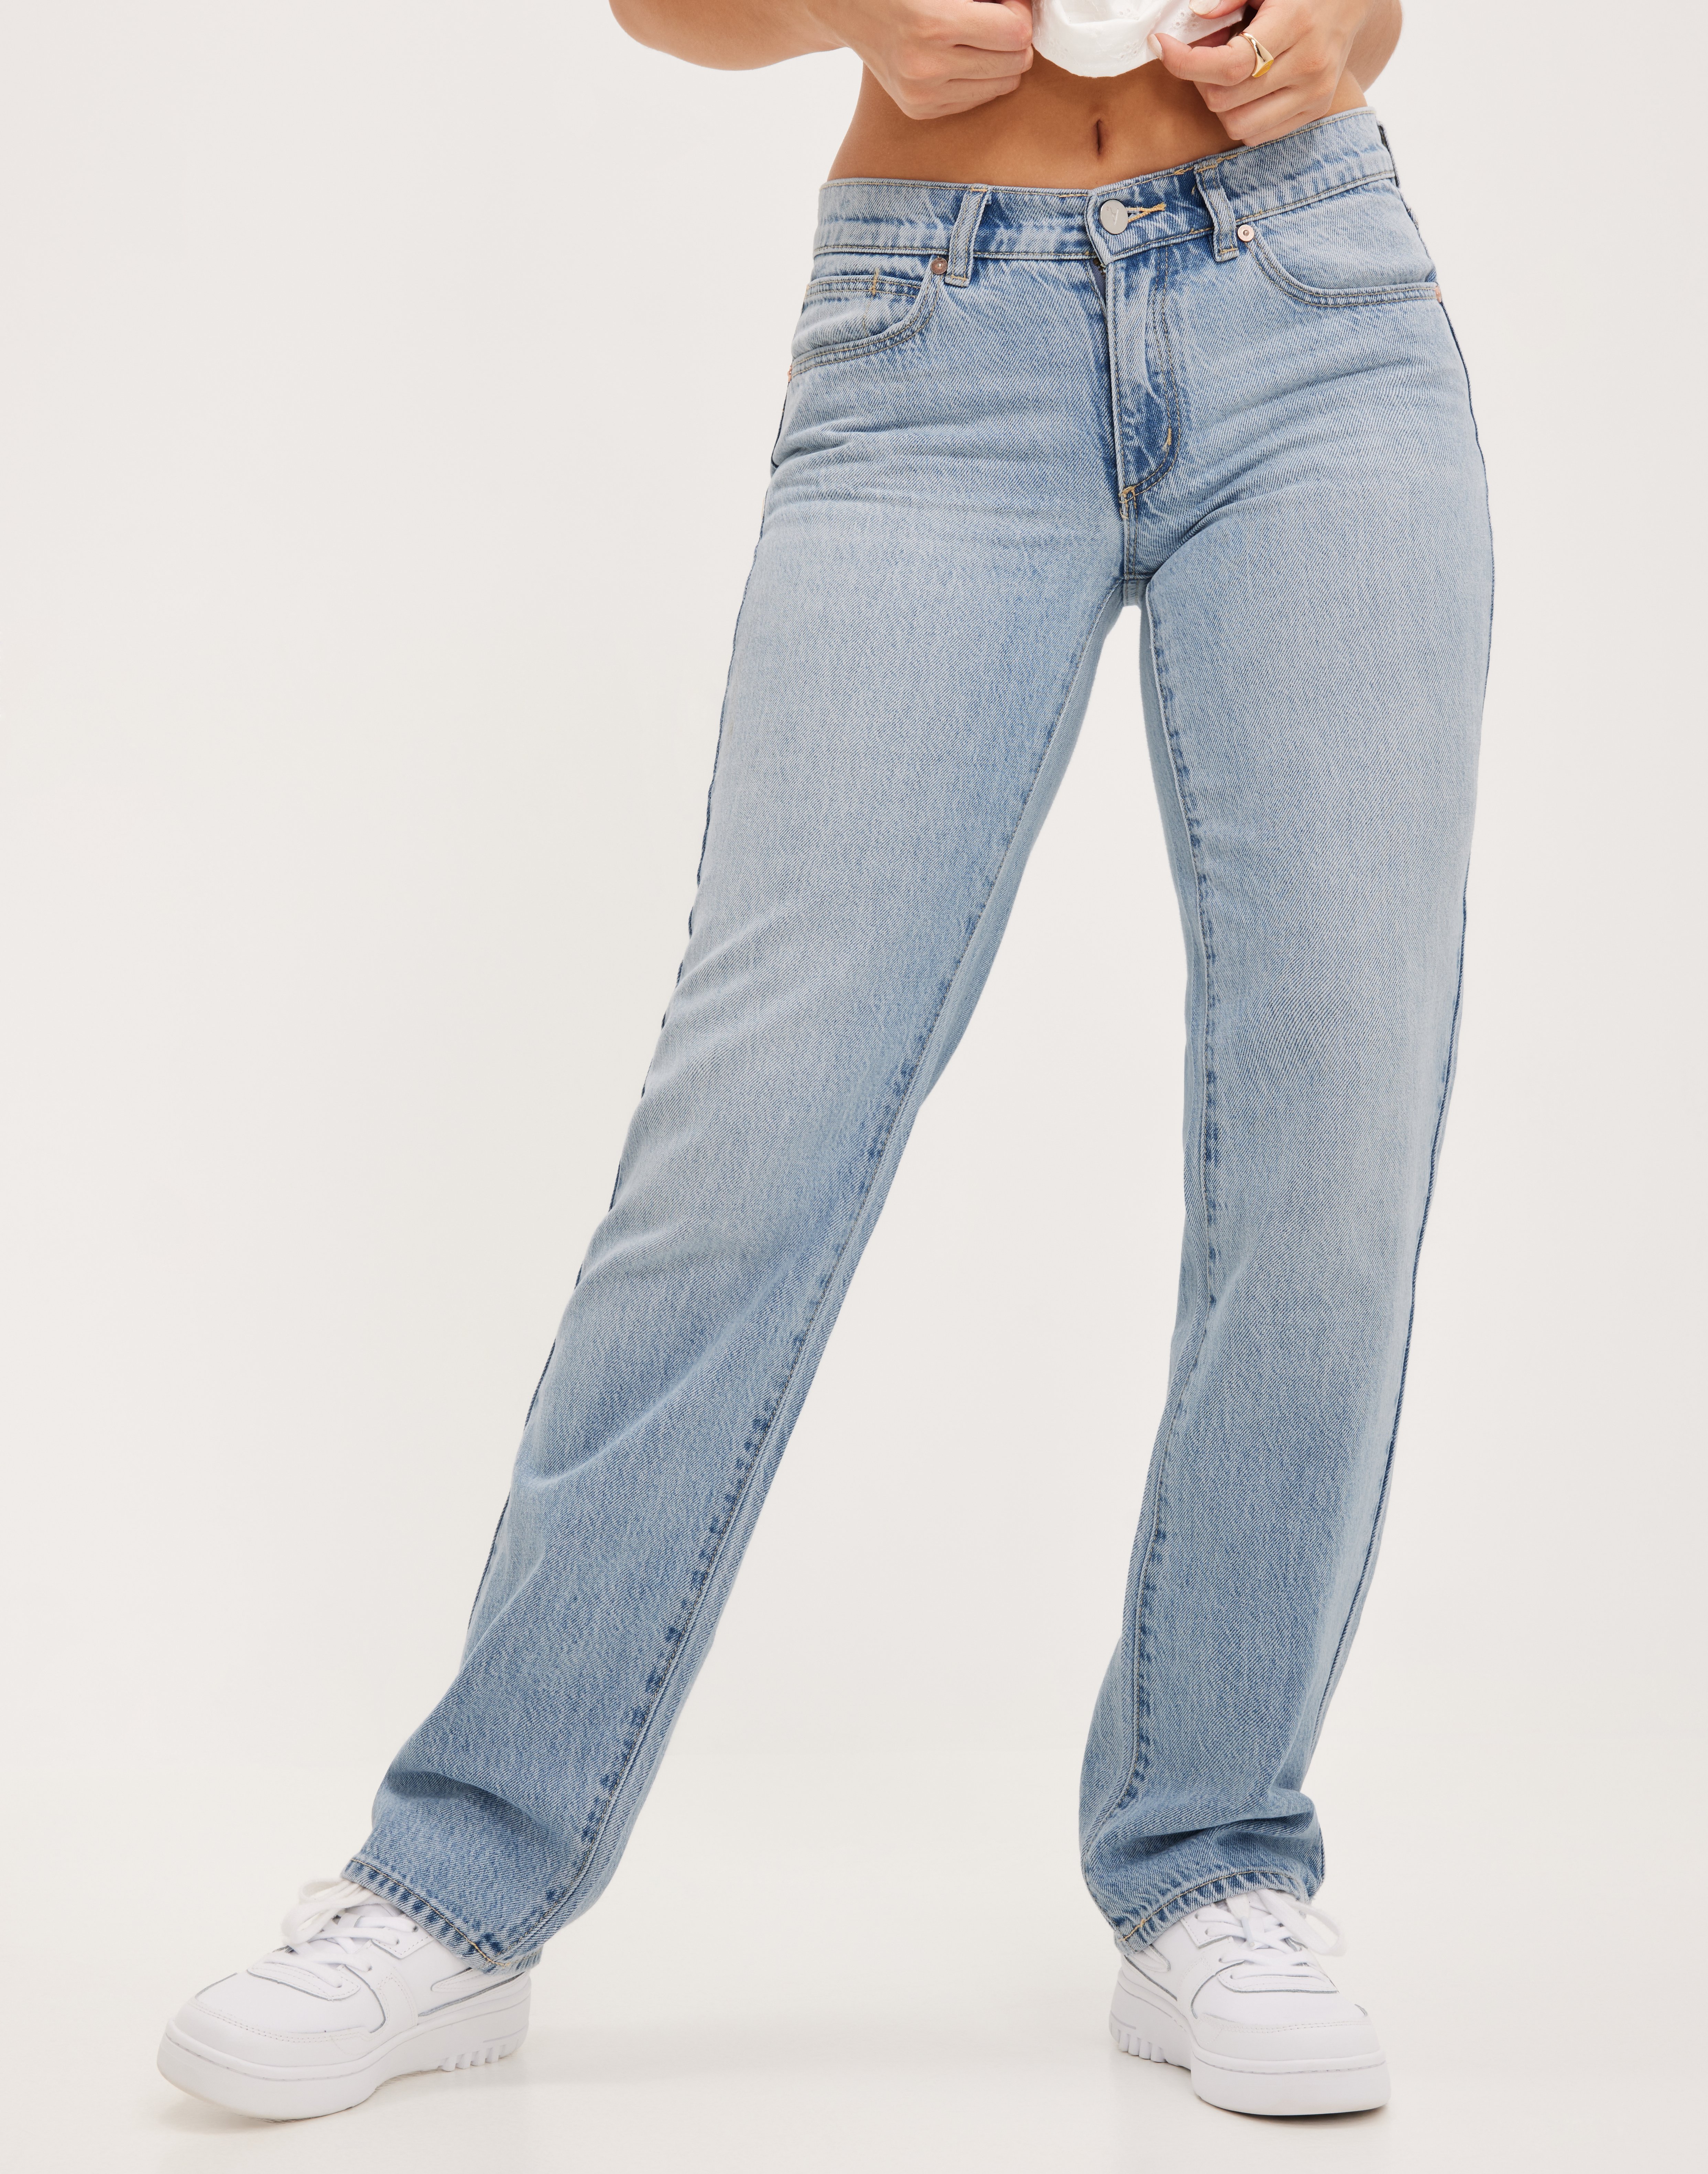 Abrand Jeans - Straight - A 99 Low Straight Kylee Organic - Jeans - Straight